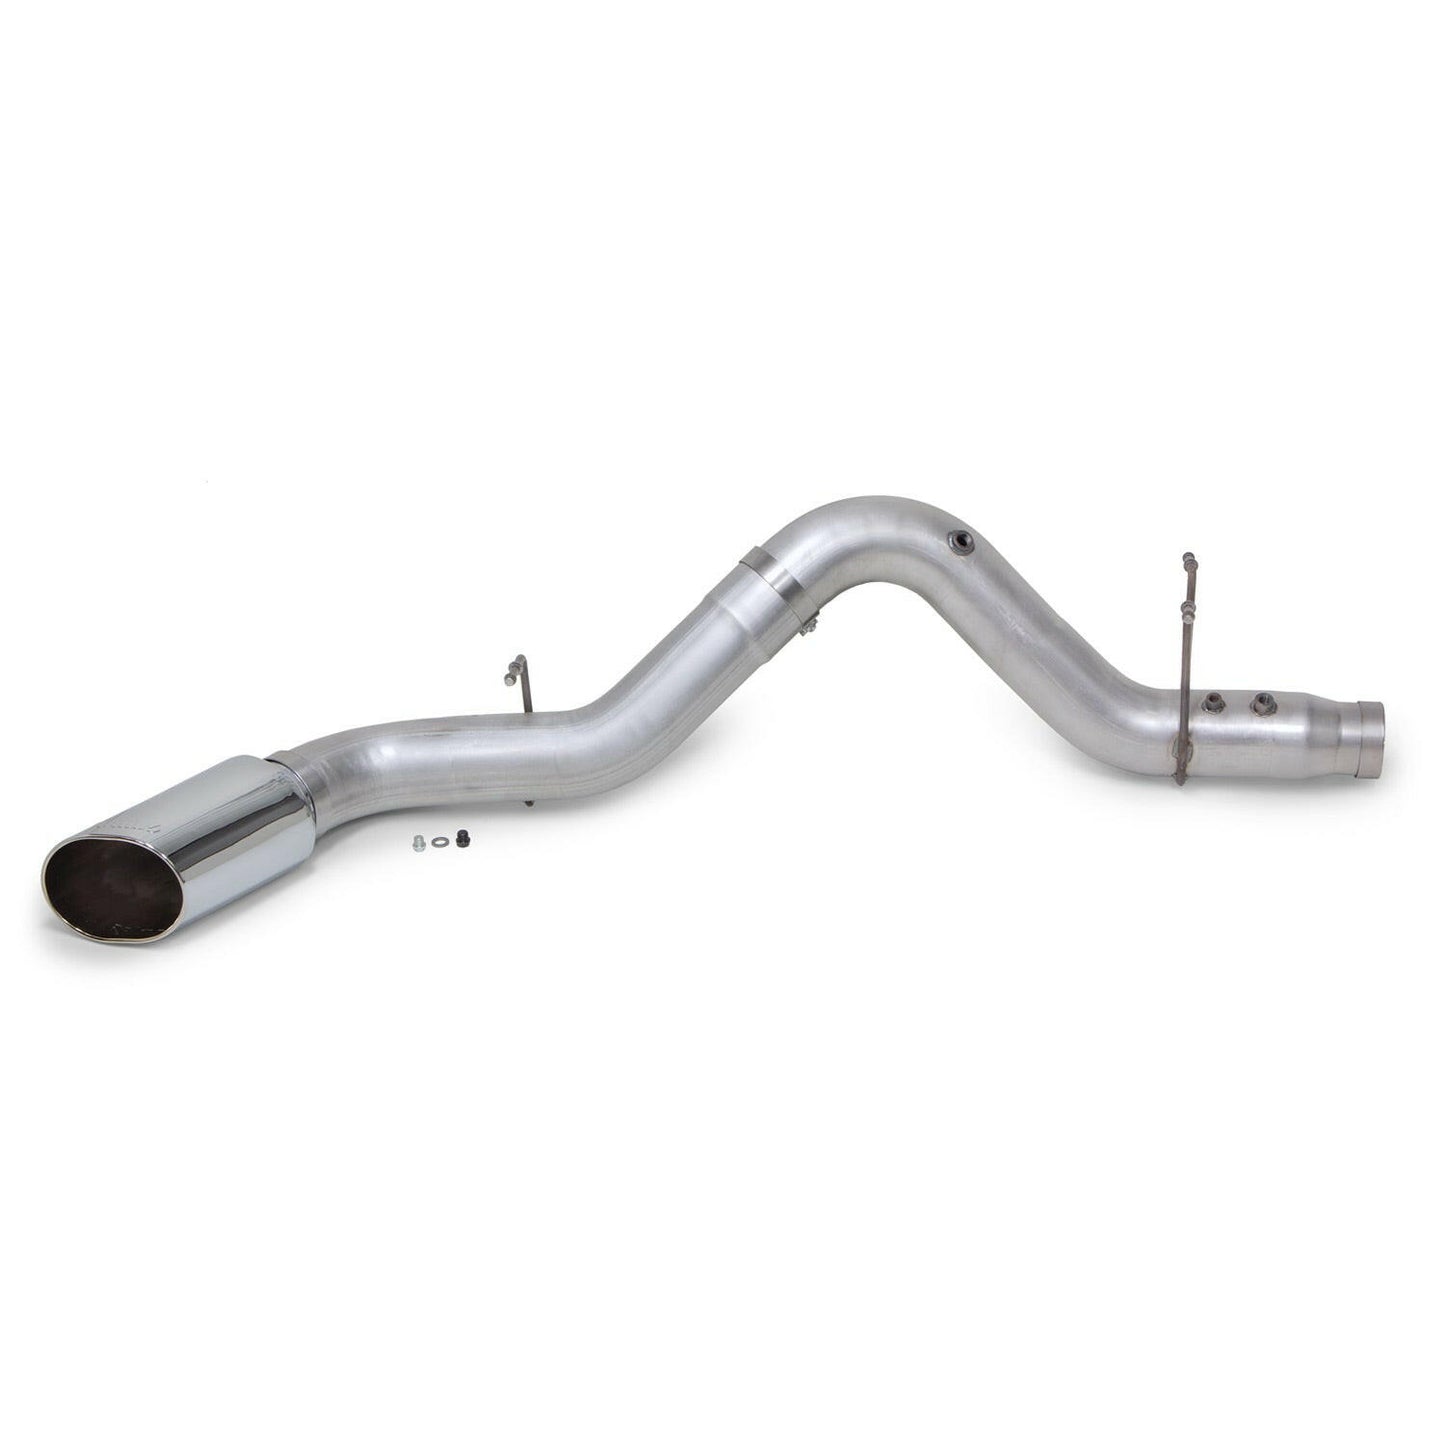 Banks Power Monster Exhaust System 5-inch Single Exit Chrome Tip 2017- 2019 Chevy/GMC 2500/3500 Duramax 6.6L L5P Banks Power.